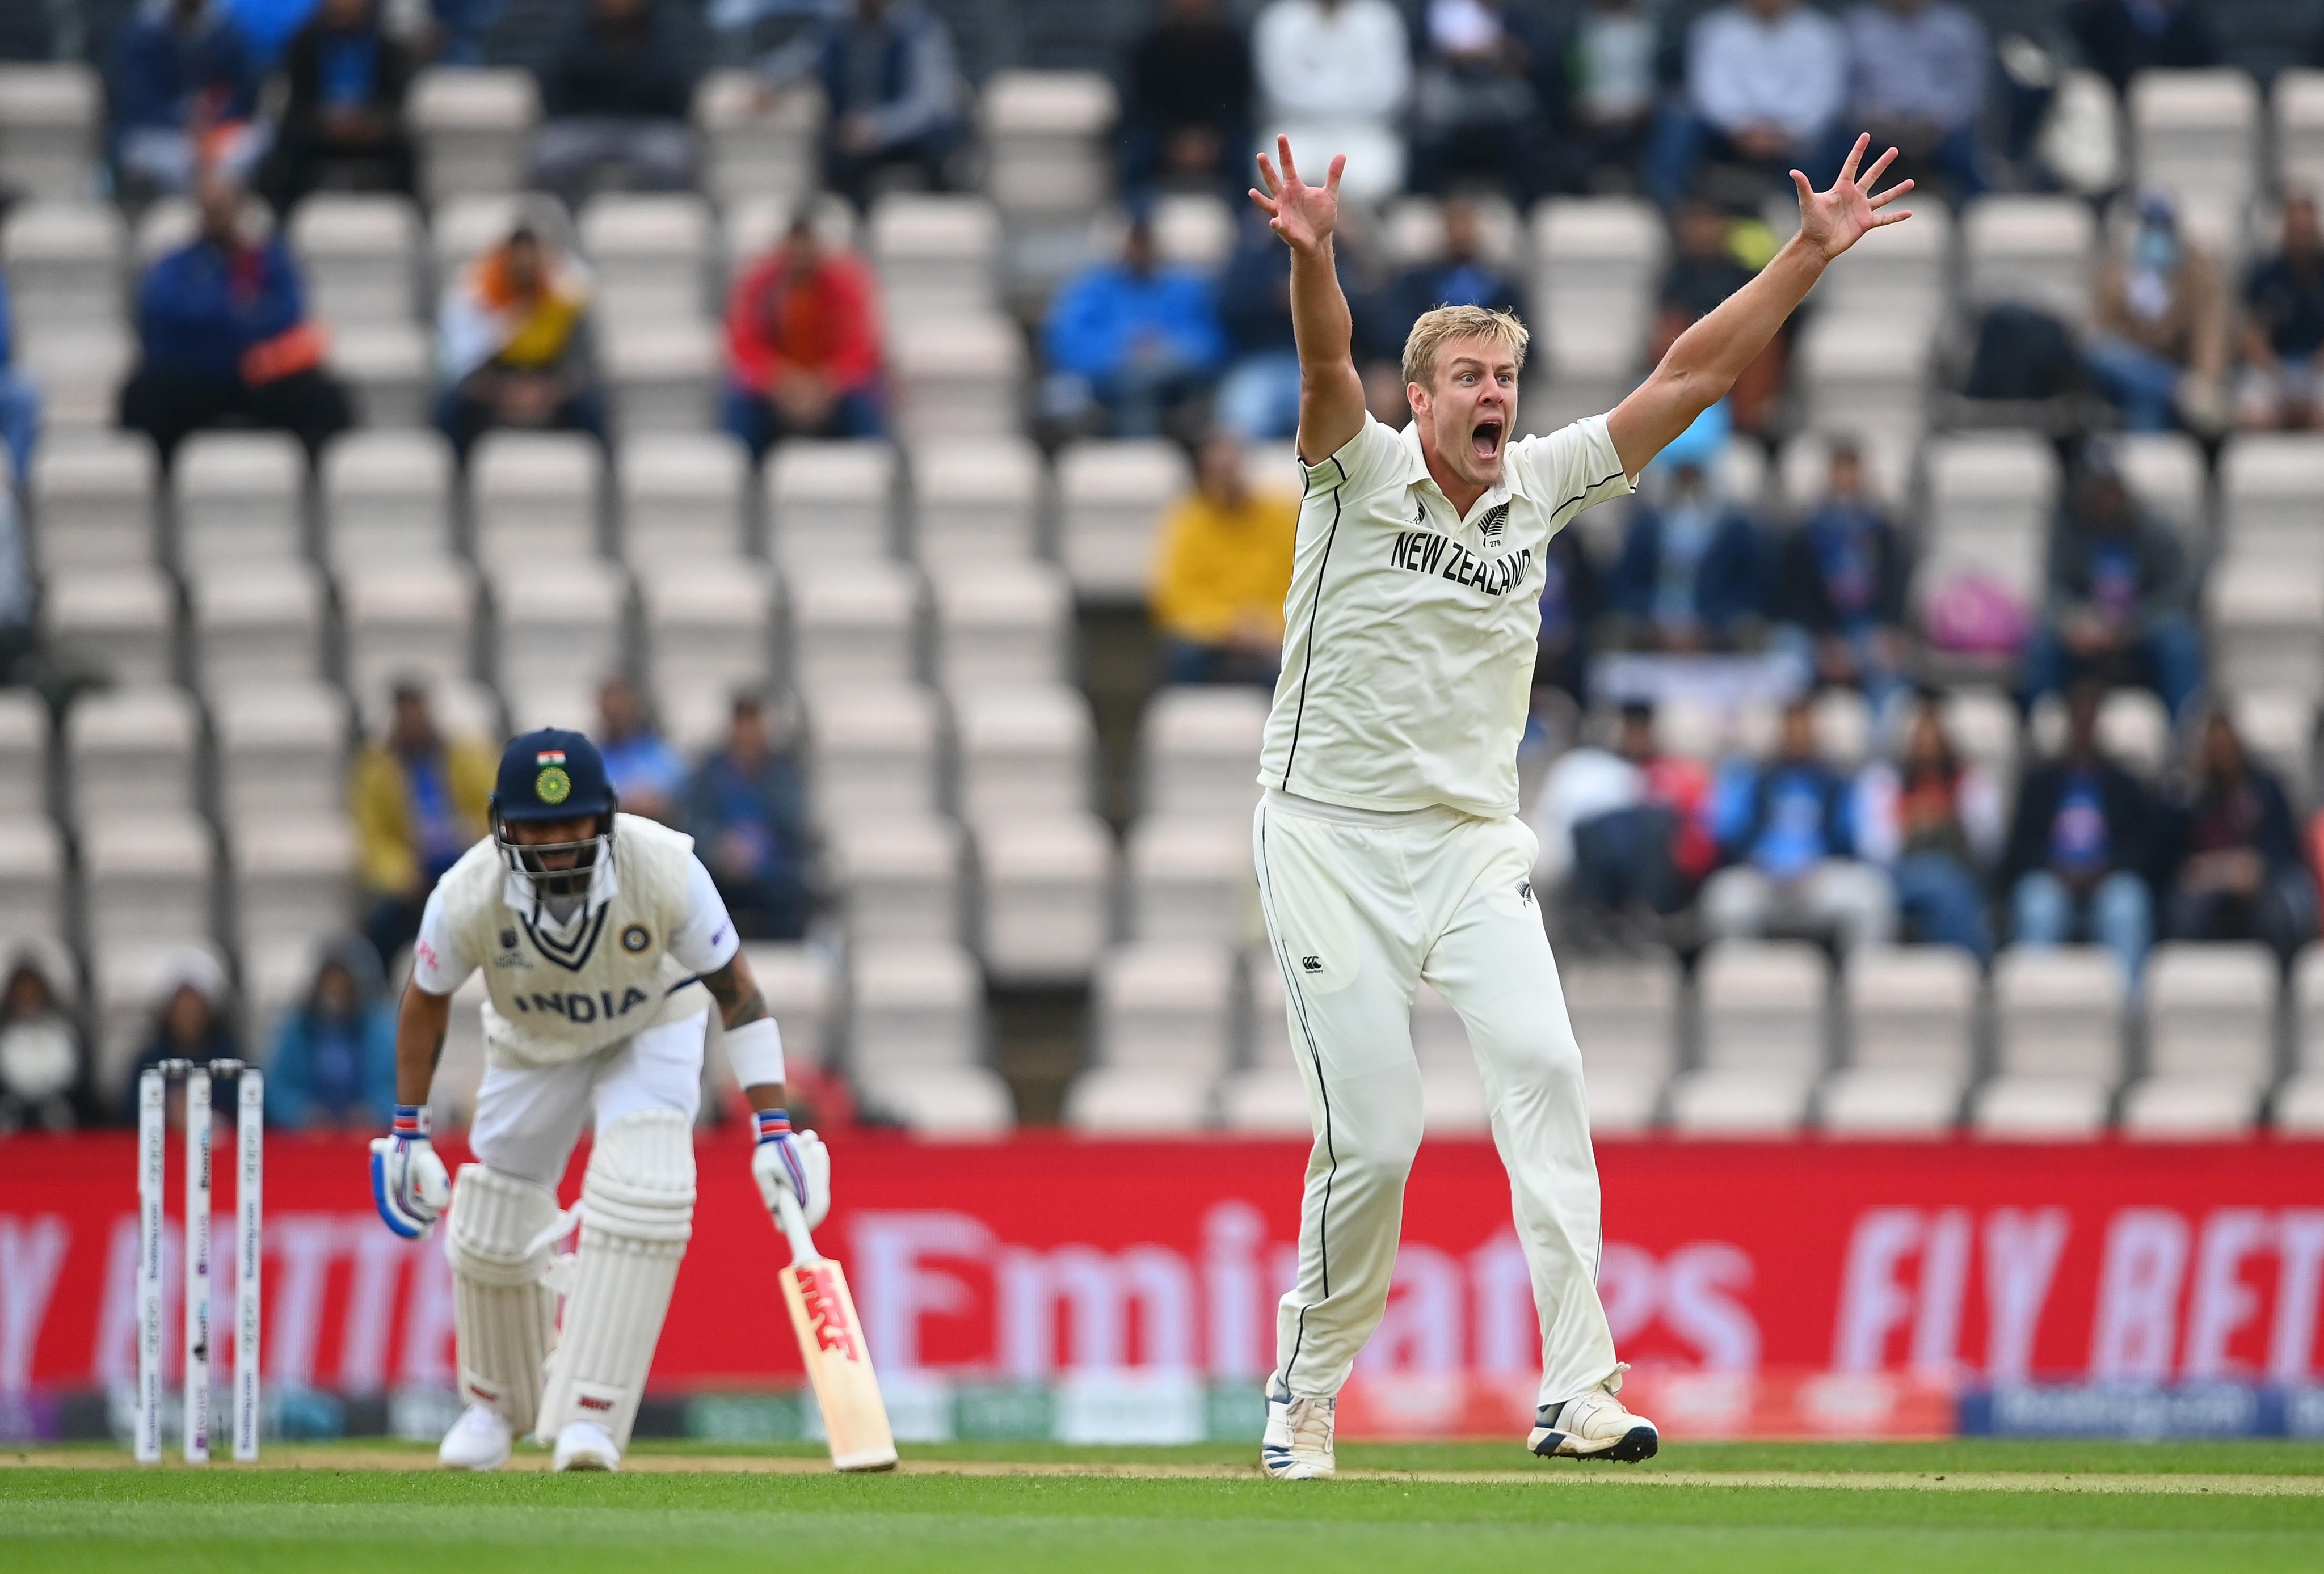 Kyle Jamieson and the ‘masterful’ art of setting up Indian batsmen